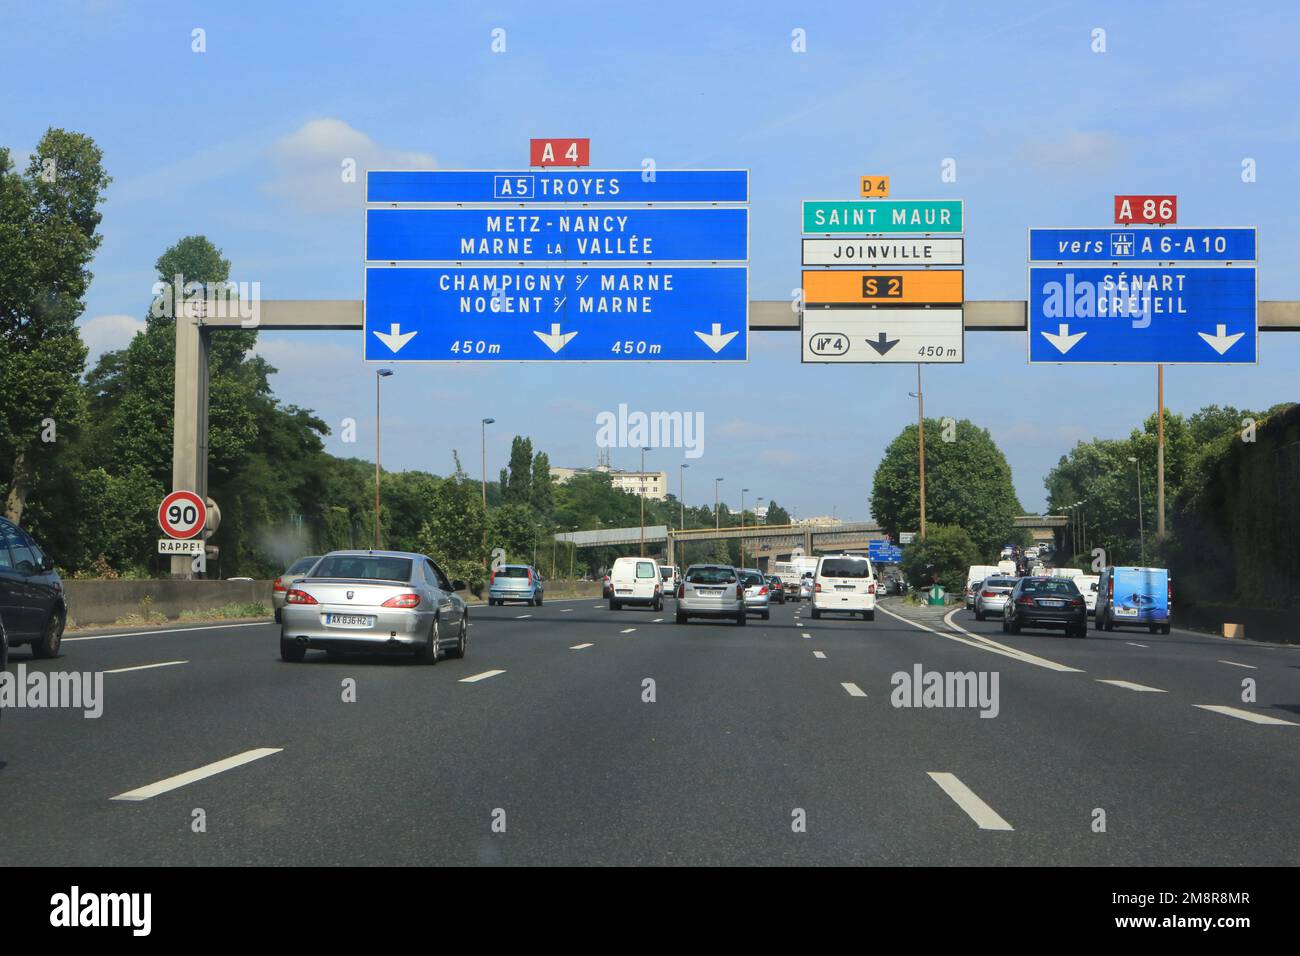 Panneaux routiers. A4 - A86. Autoroutes. France. Europe. / Road signs. A4 - A86. Highways. France. Europe. Stock Photo